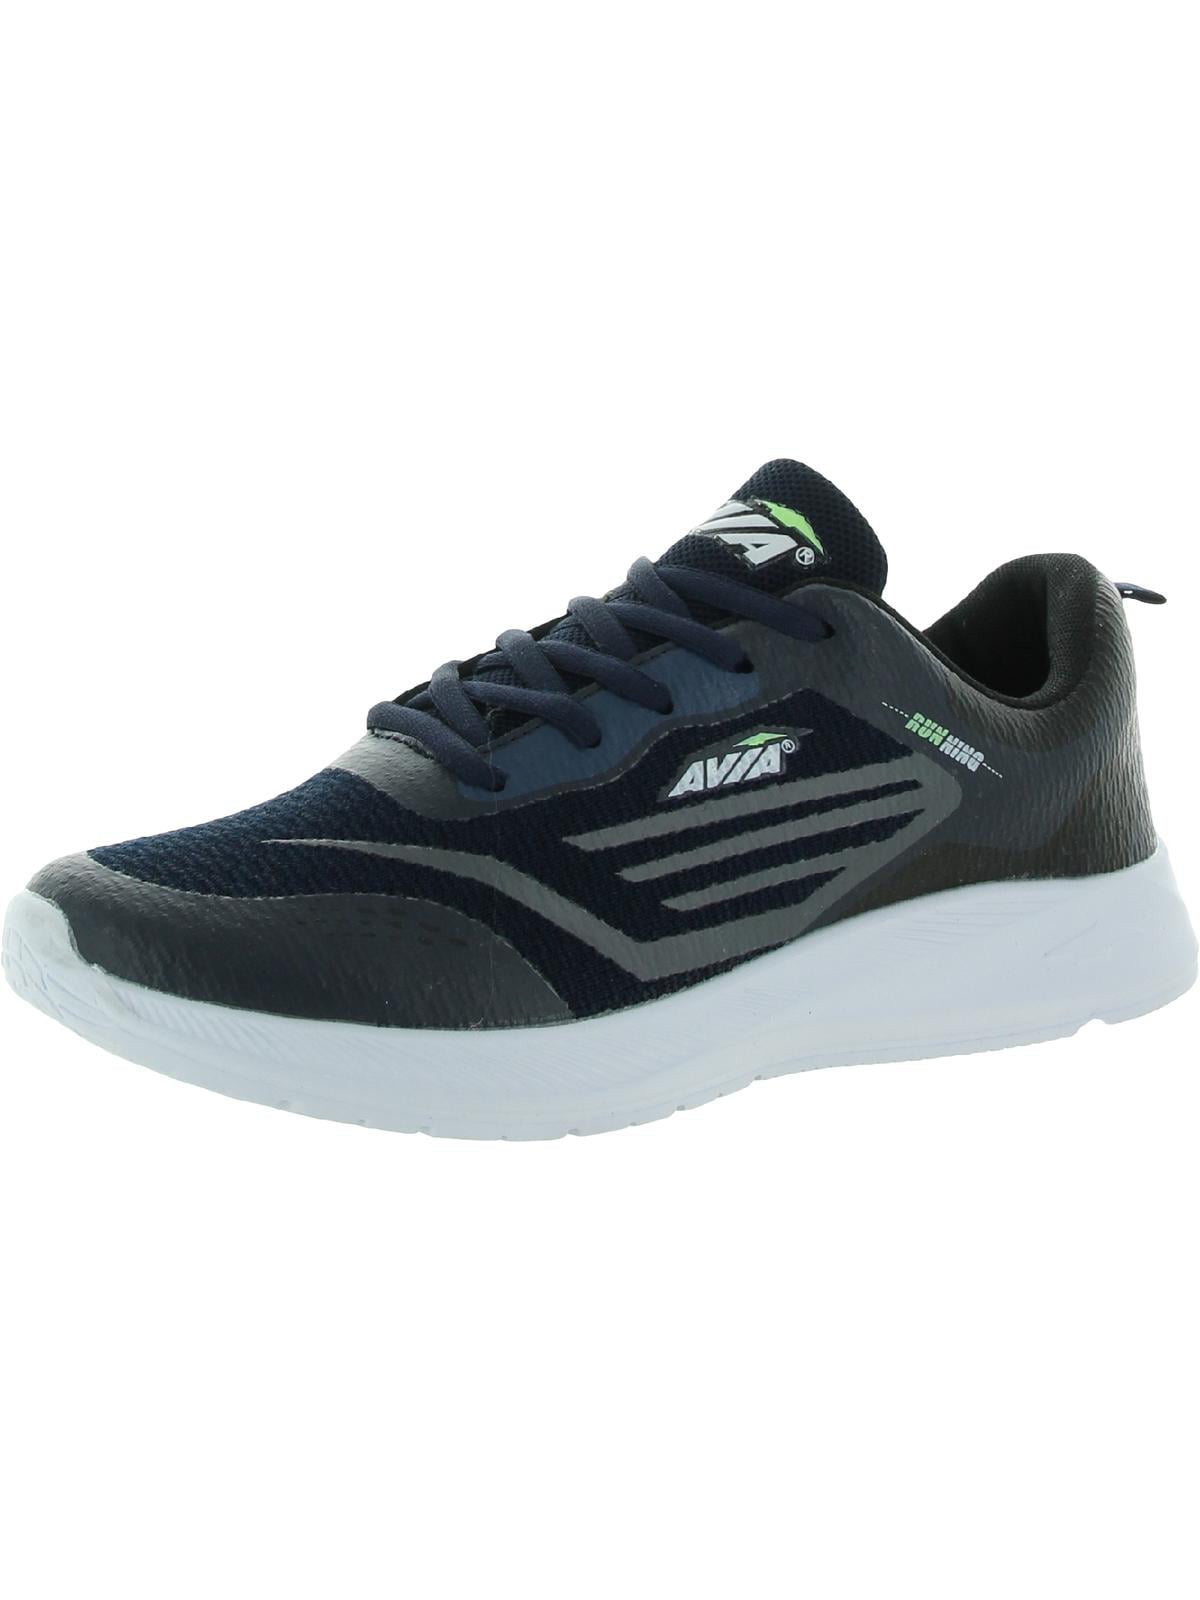 Avia Mens Avi-Kriss Fitness Lifestyle Athletic and Training Shoes ...